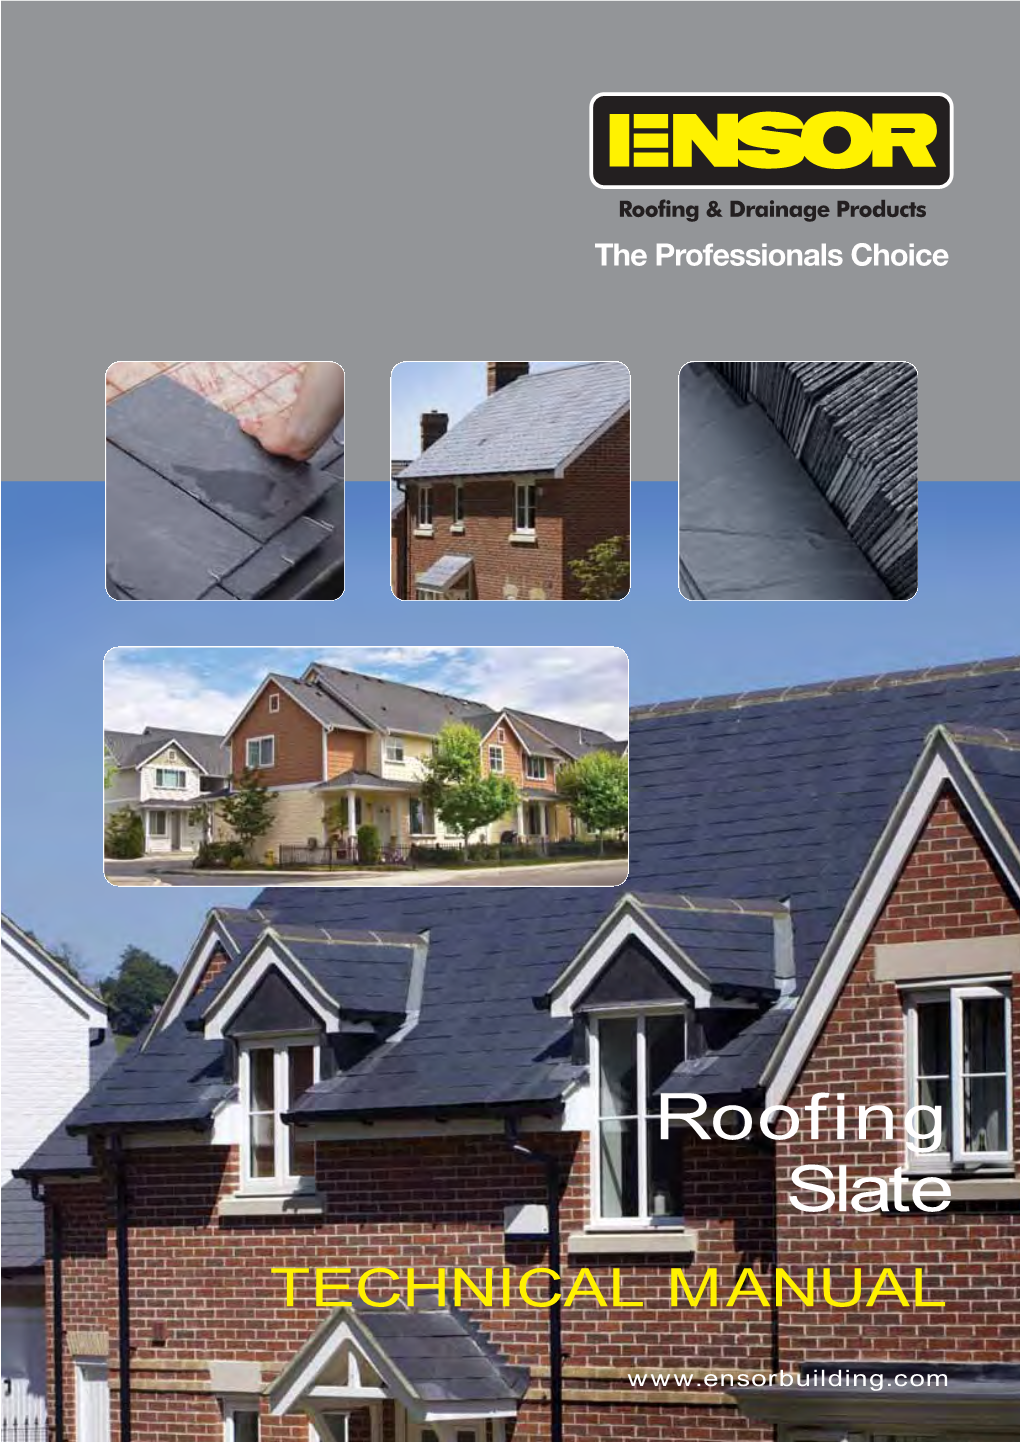 Roofing Slate TECHNICAL MANUAL